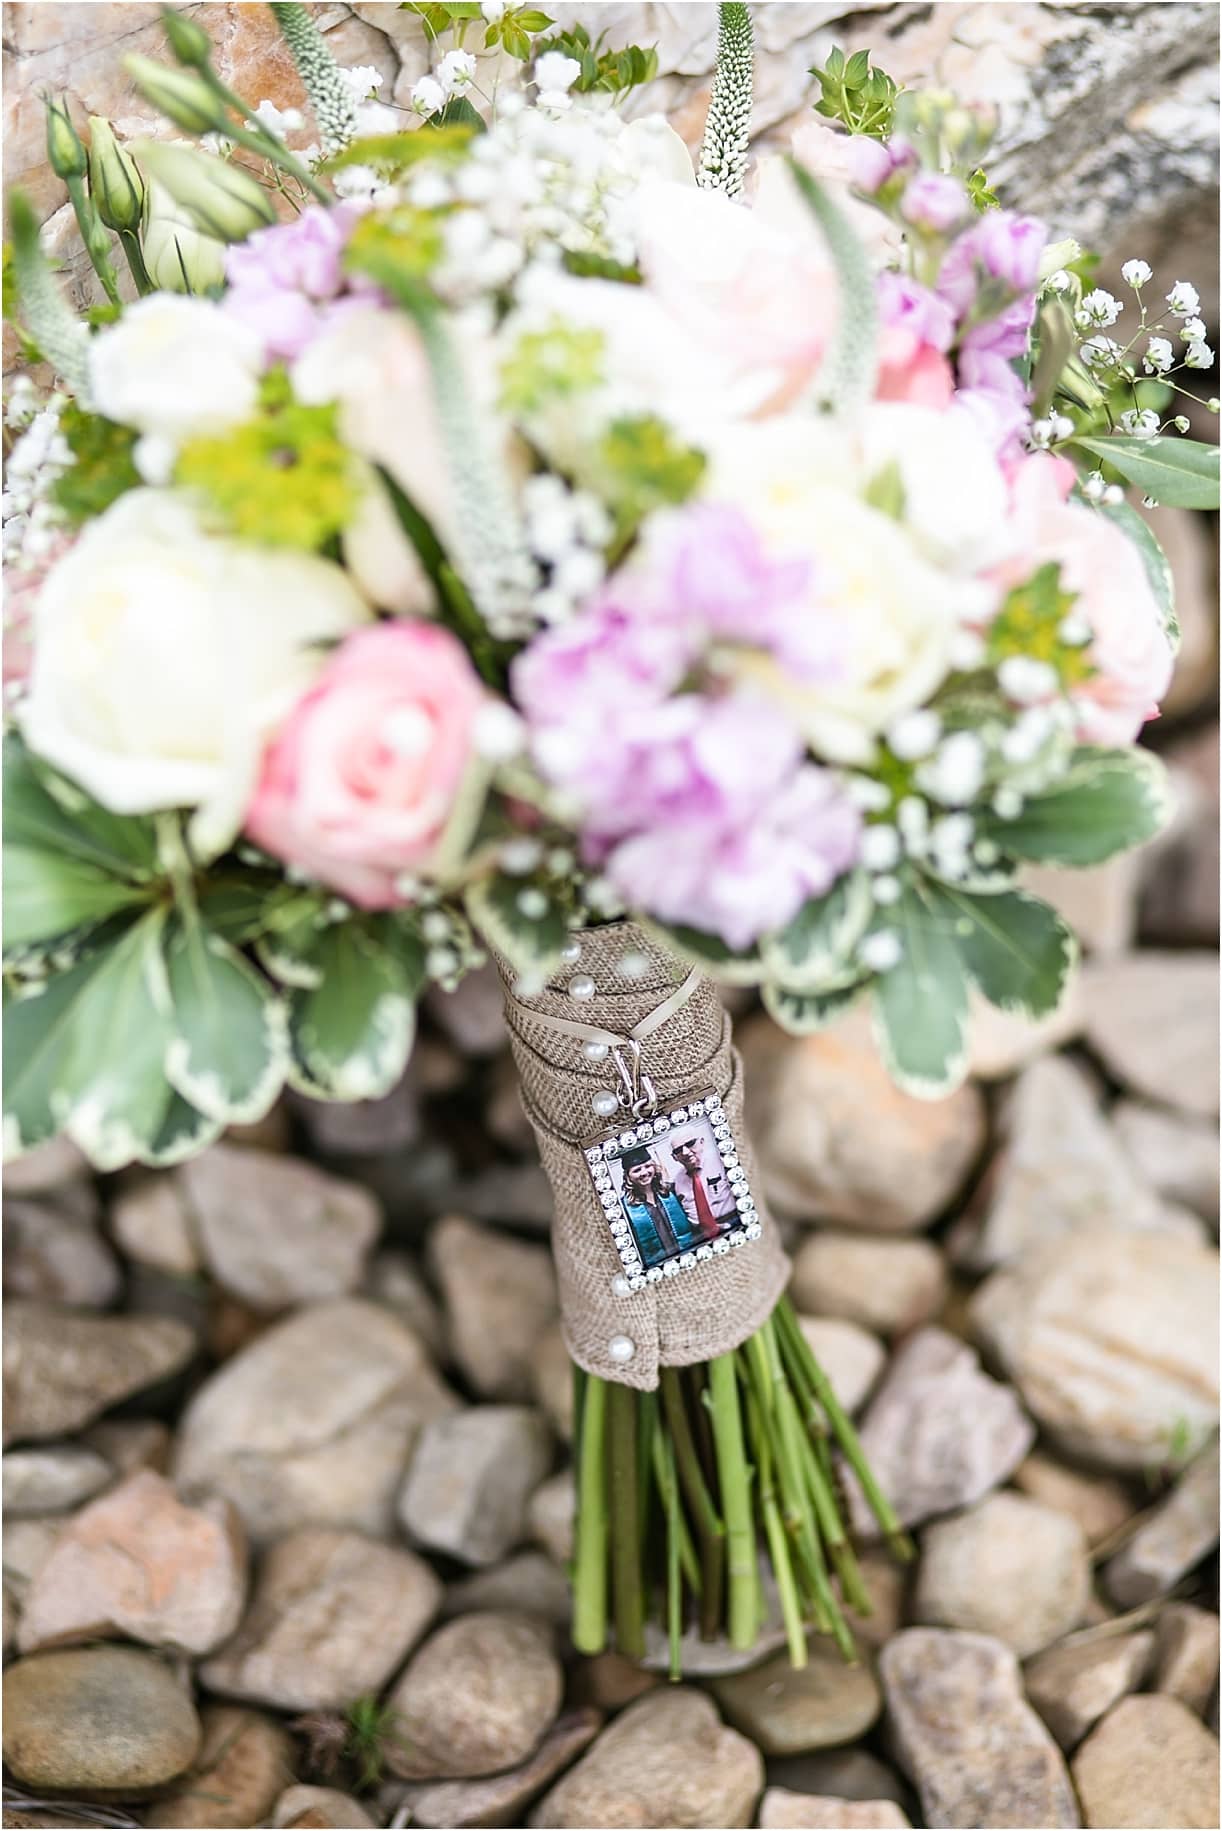 Ways to Remember Lost Loved Ones at Your Wedding Honor Deceased | Hill City Bride Virginia Wedding Blog